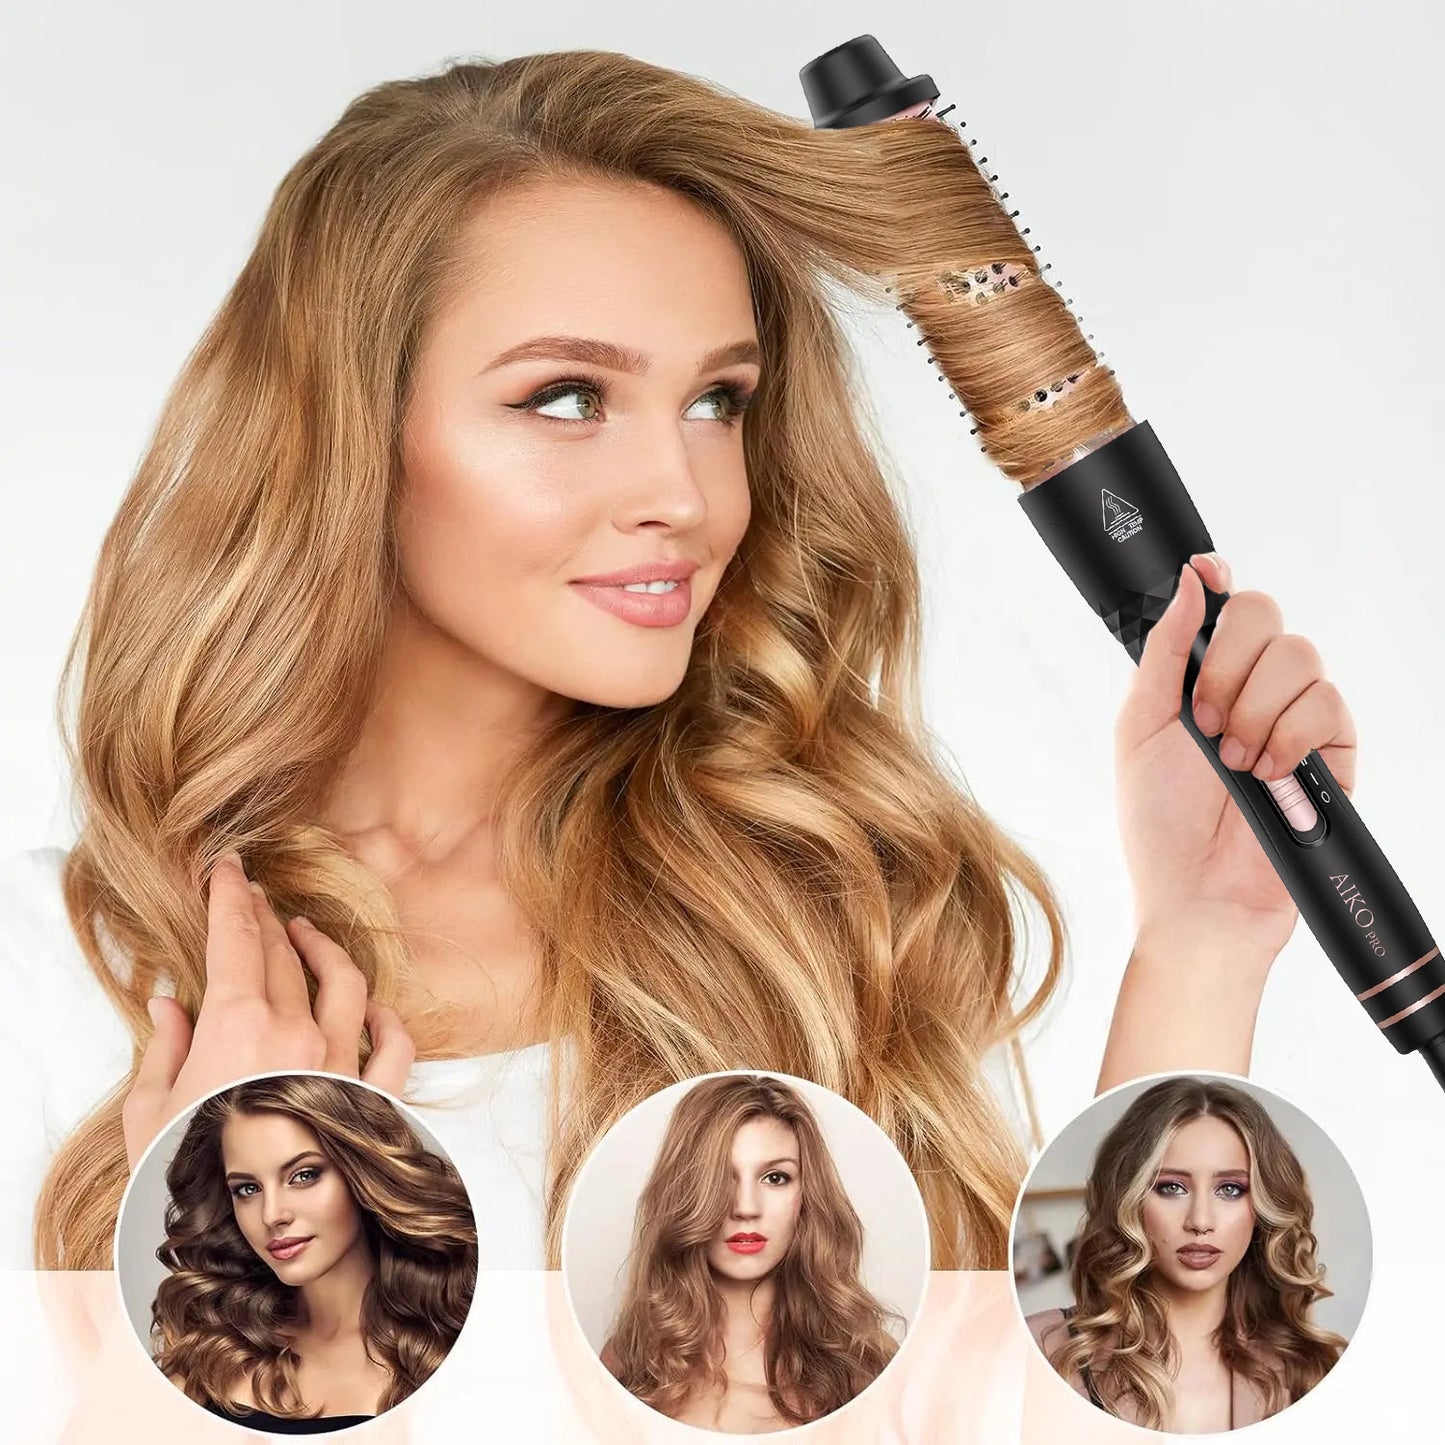 1.5 Inch Thermal Curling Brush for Natural Curls, Ionic Ceramic Heated Round Brush Adds Volume and Makes Hair Smoother, Dual Voltage Heated Round Brush Volumizer, Fast Heat-Up and Easy to Use